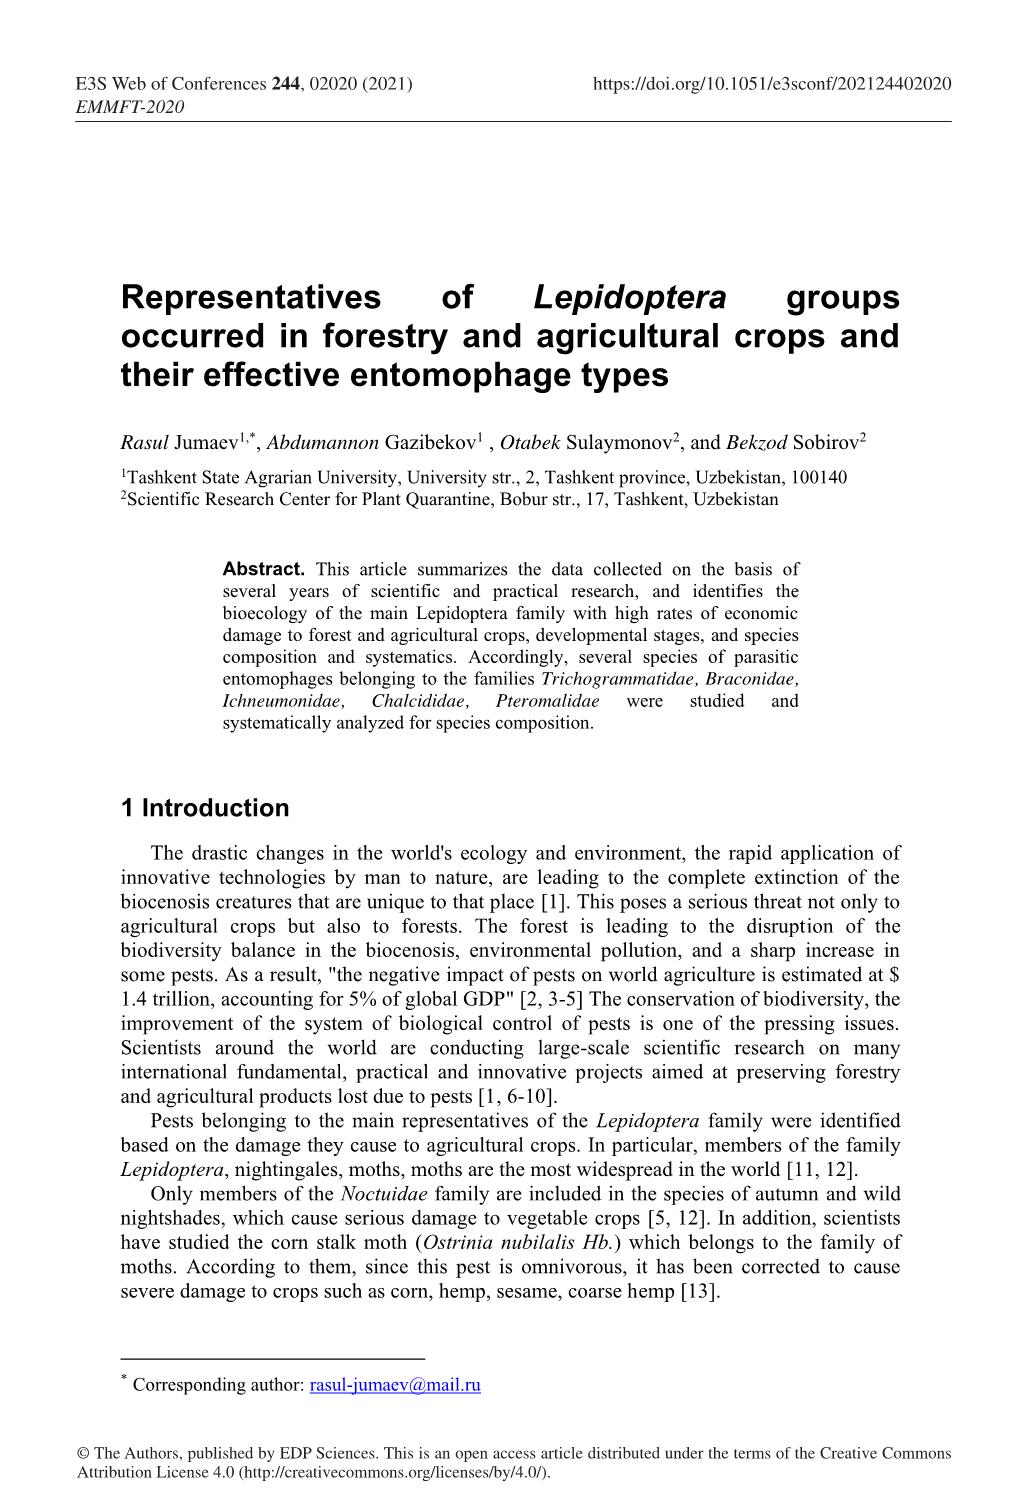 Representatives of Lepidoptera Groups Occurred in Forestry and Agricultural Crops and Their Effective Entomophage Types